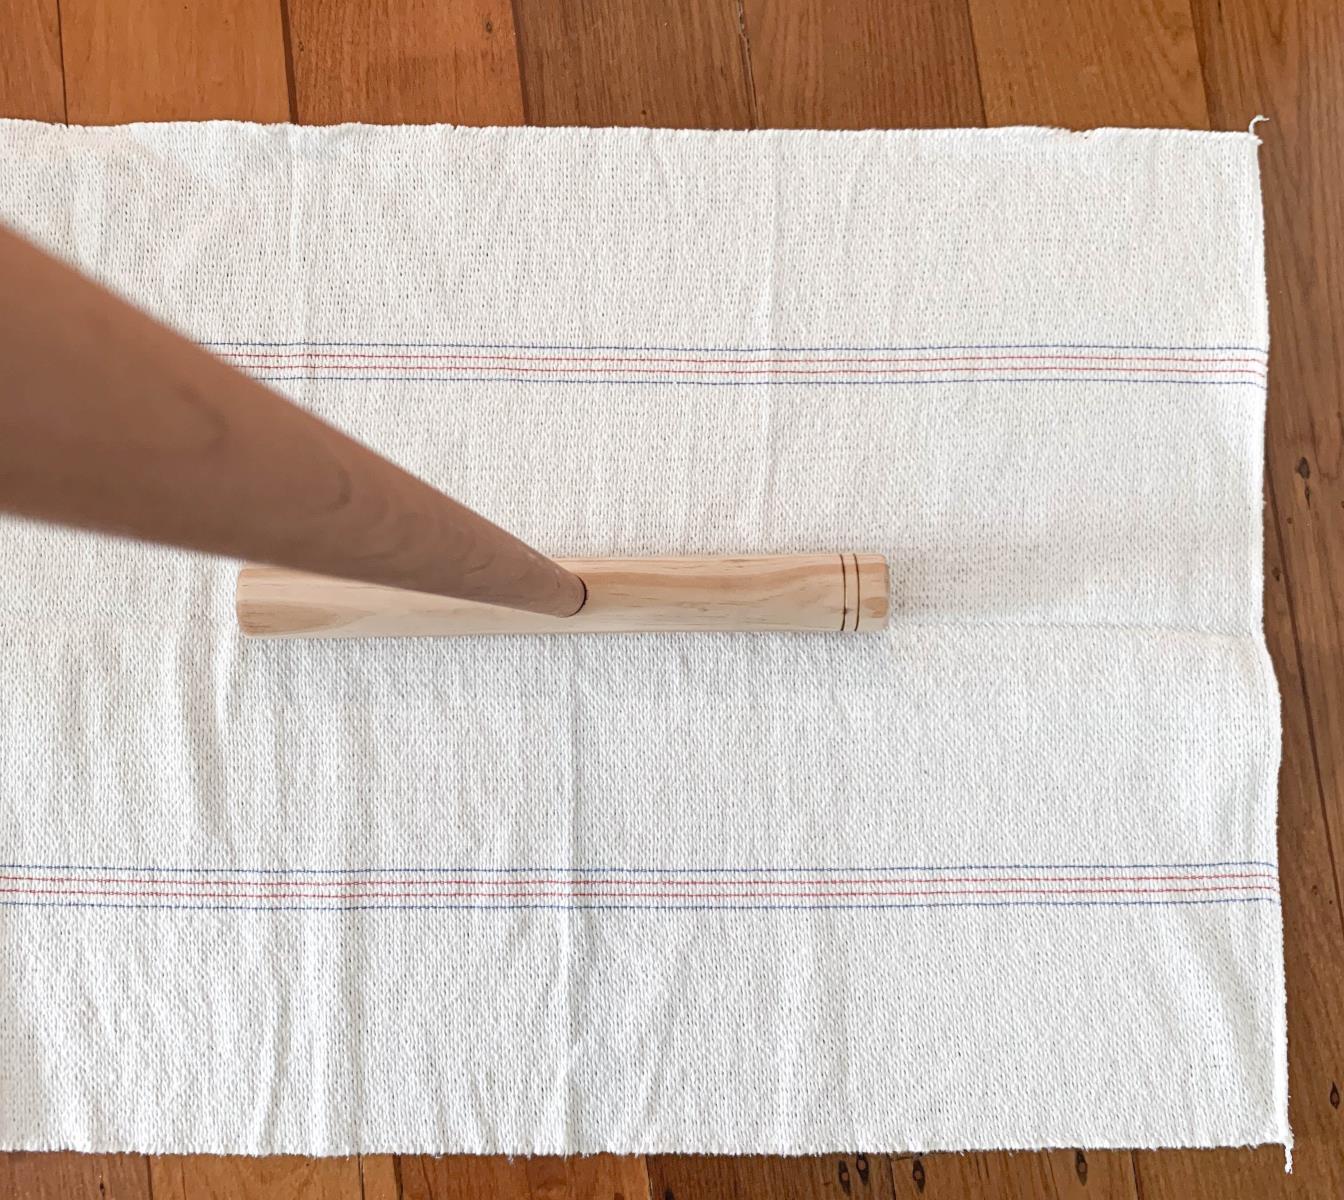 How To Use A Cuban Mop